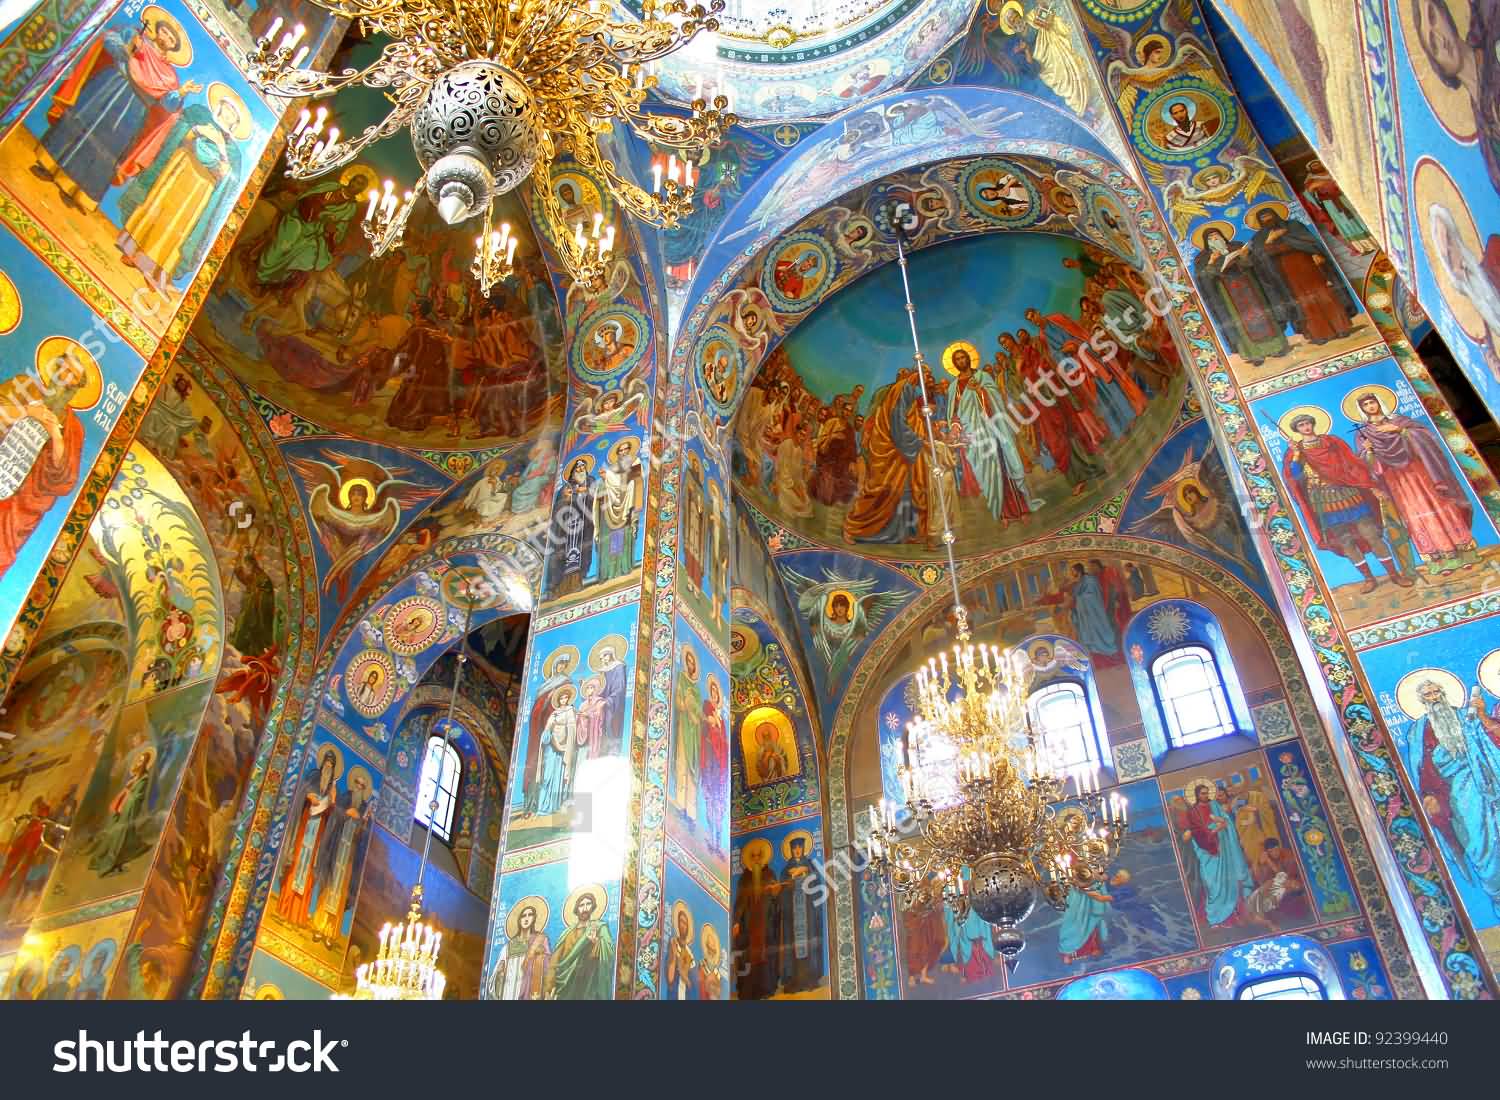 Amazing Paintings Inside The Church Of The Savior On Blood